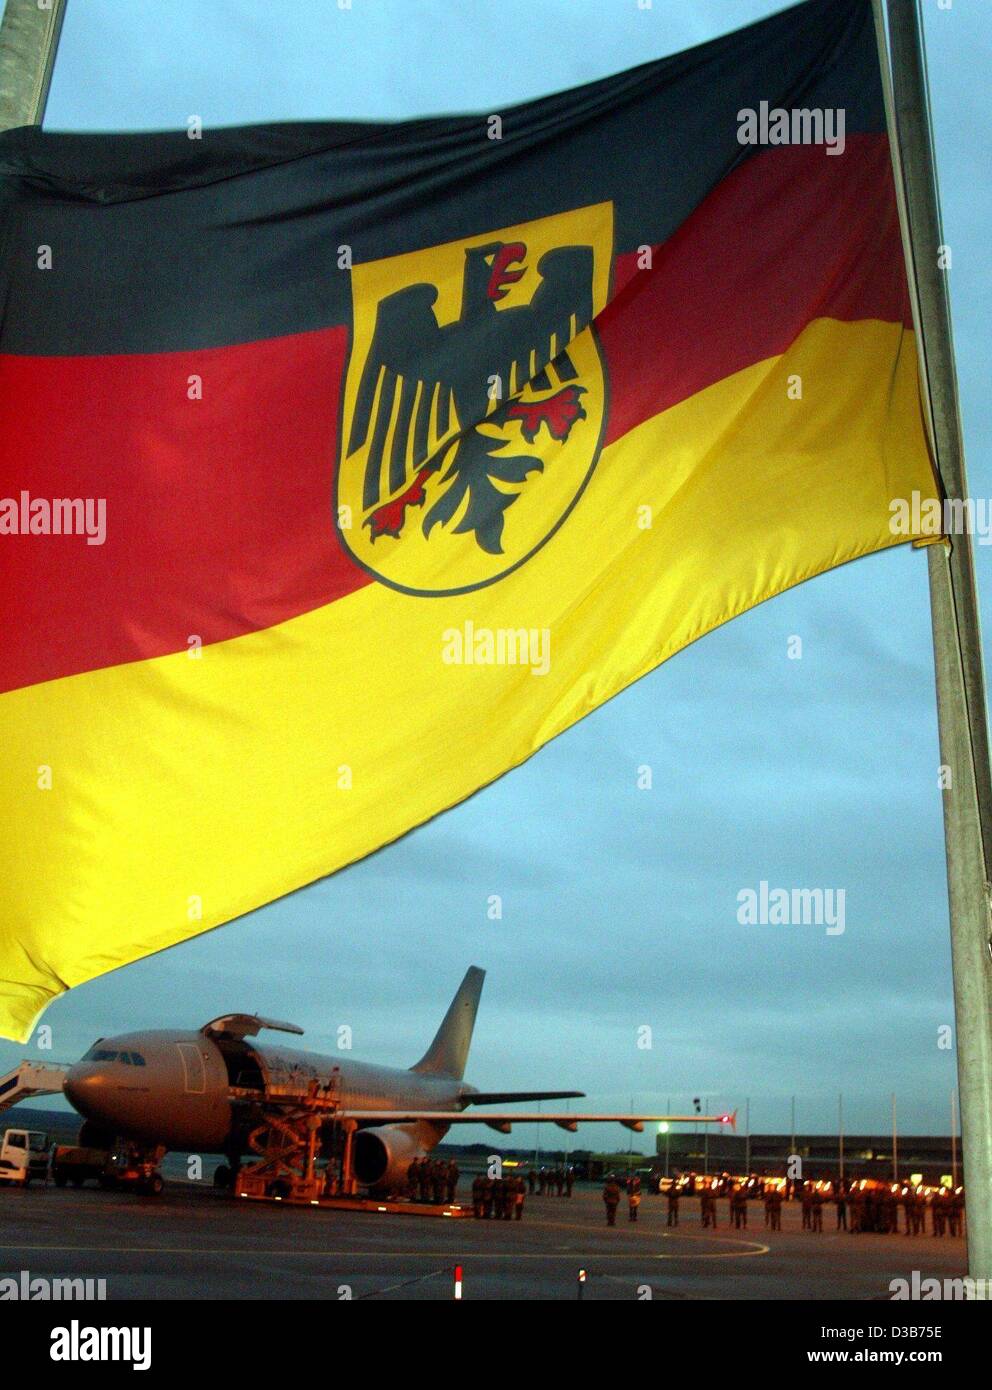 (dpa) - The German flag is on half-mast as the coffins containing the bodies of the German soldiers arrive aboard an air force plane at the airport in Cologne, Germany, 25 December 2002. The seven German peacekeepers were killed in a helicopter crash on 21 December in Afghanistan. They served on the Stock Photo